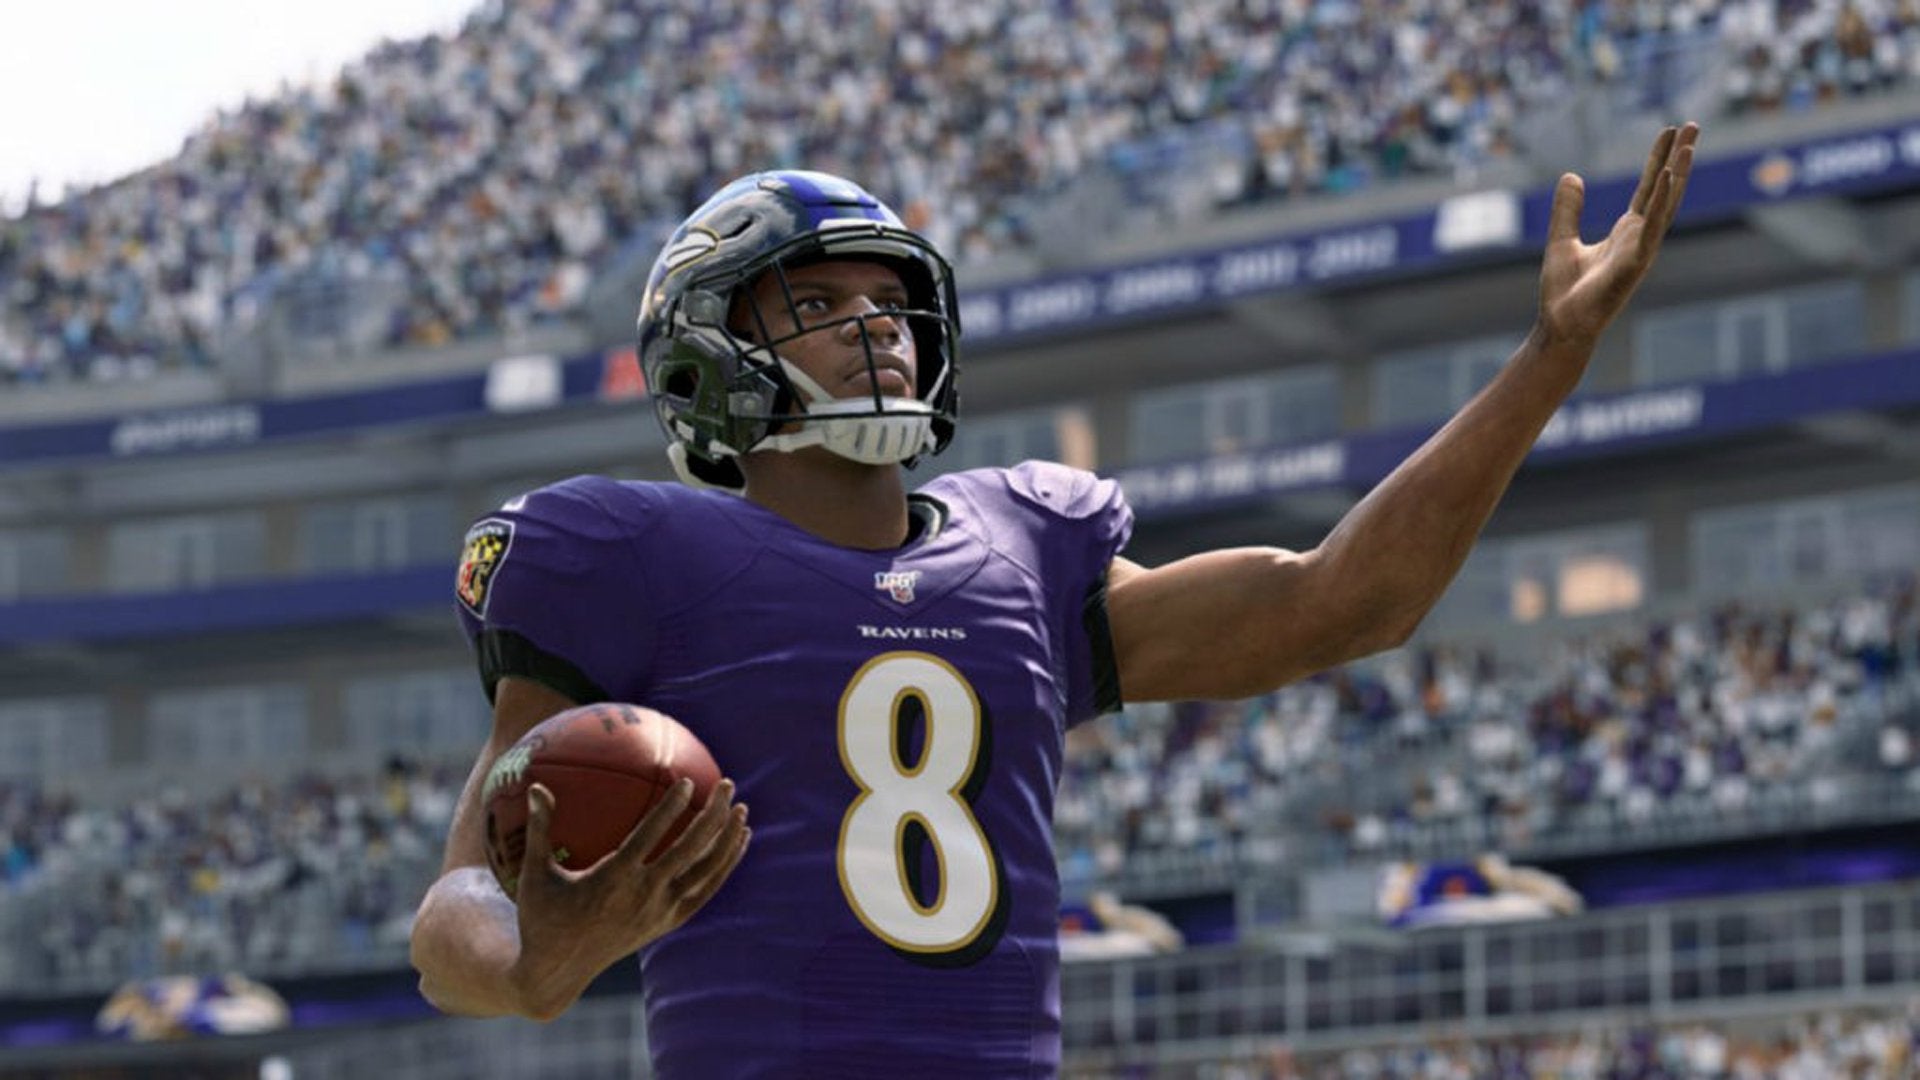 Madden NFL 22 PC Is Last Gen Because EA Wants “the Best, Quality Experience On New Consoles”: Madden